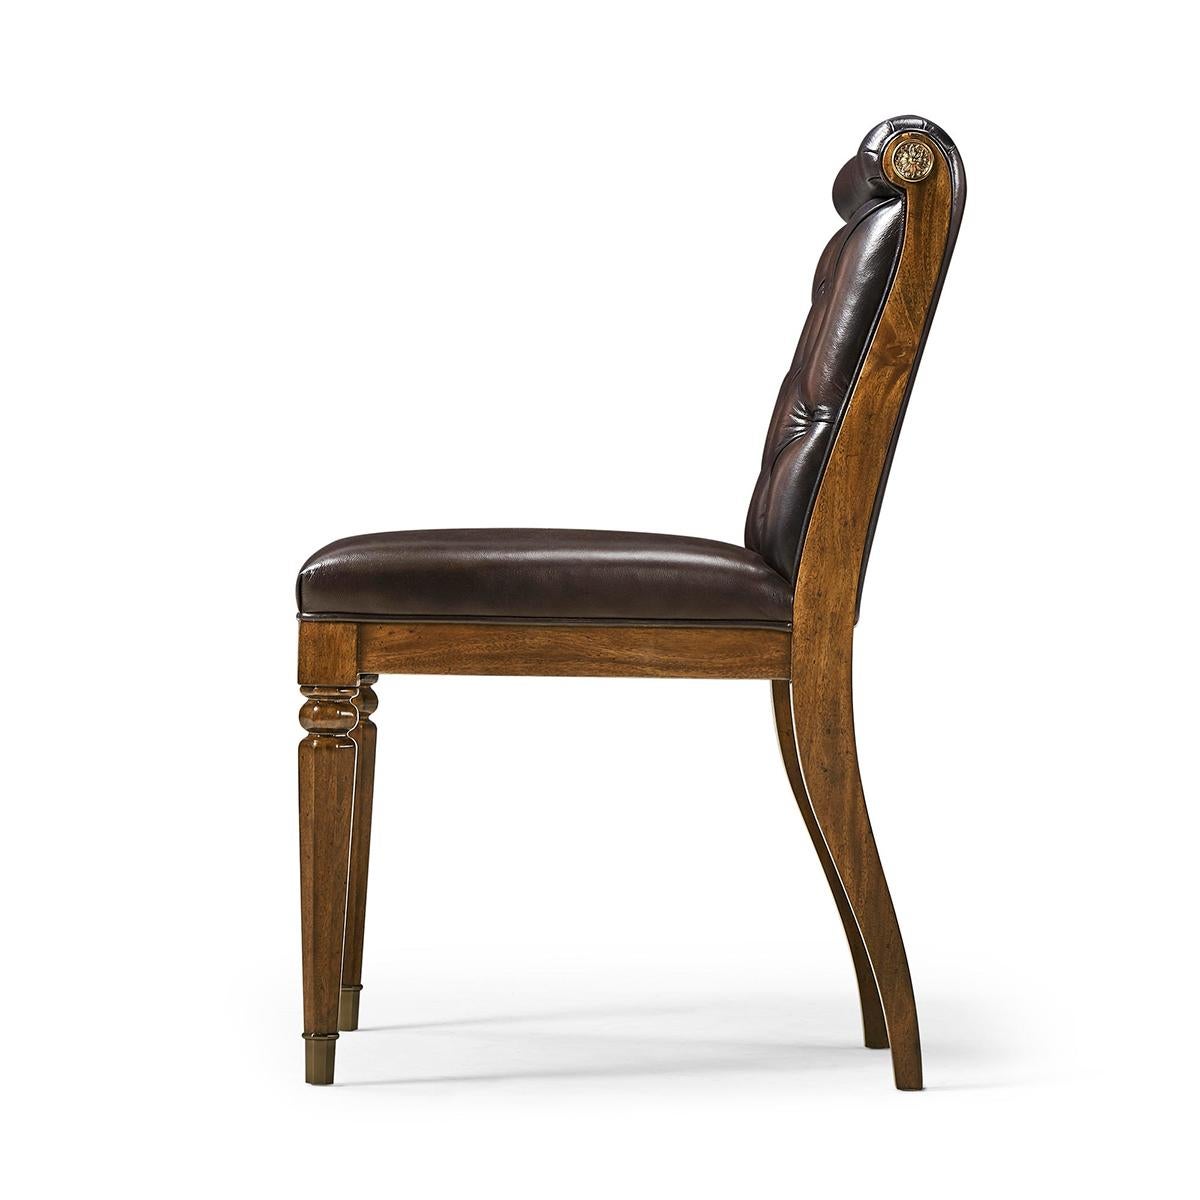 Regency Classic Leather Tufted Dining Chair For Sale